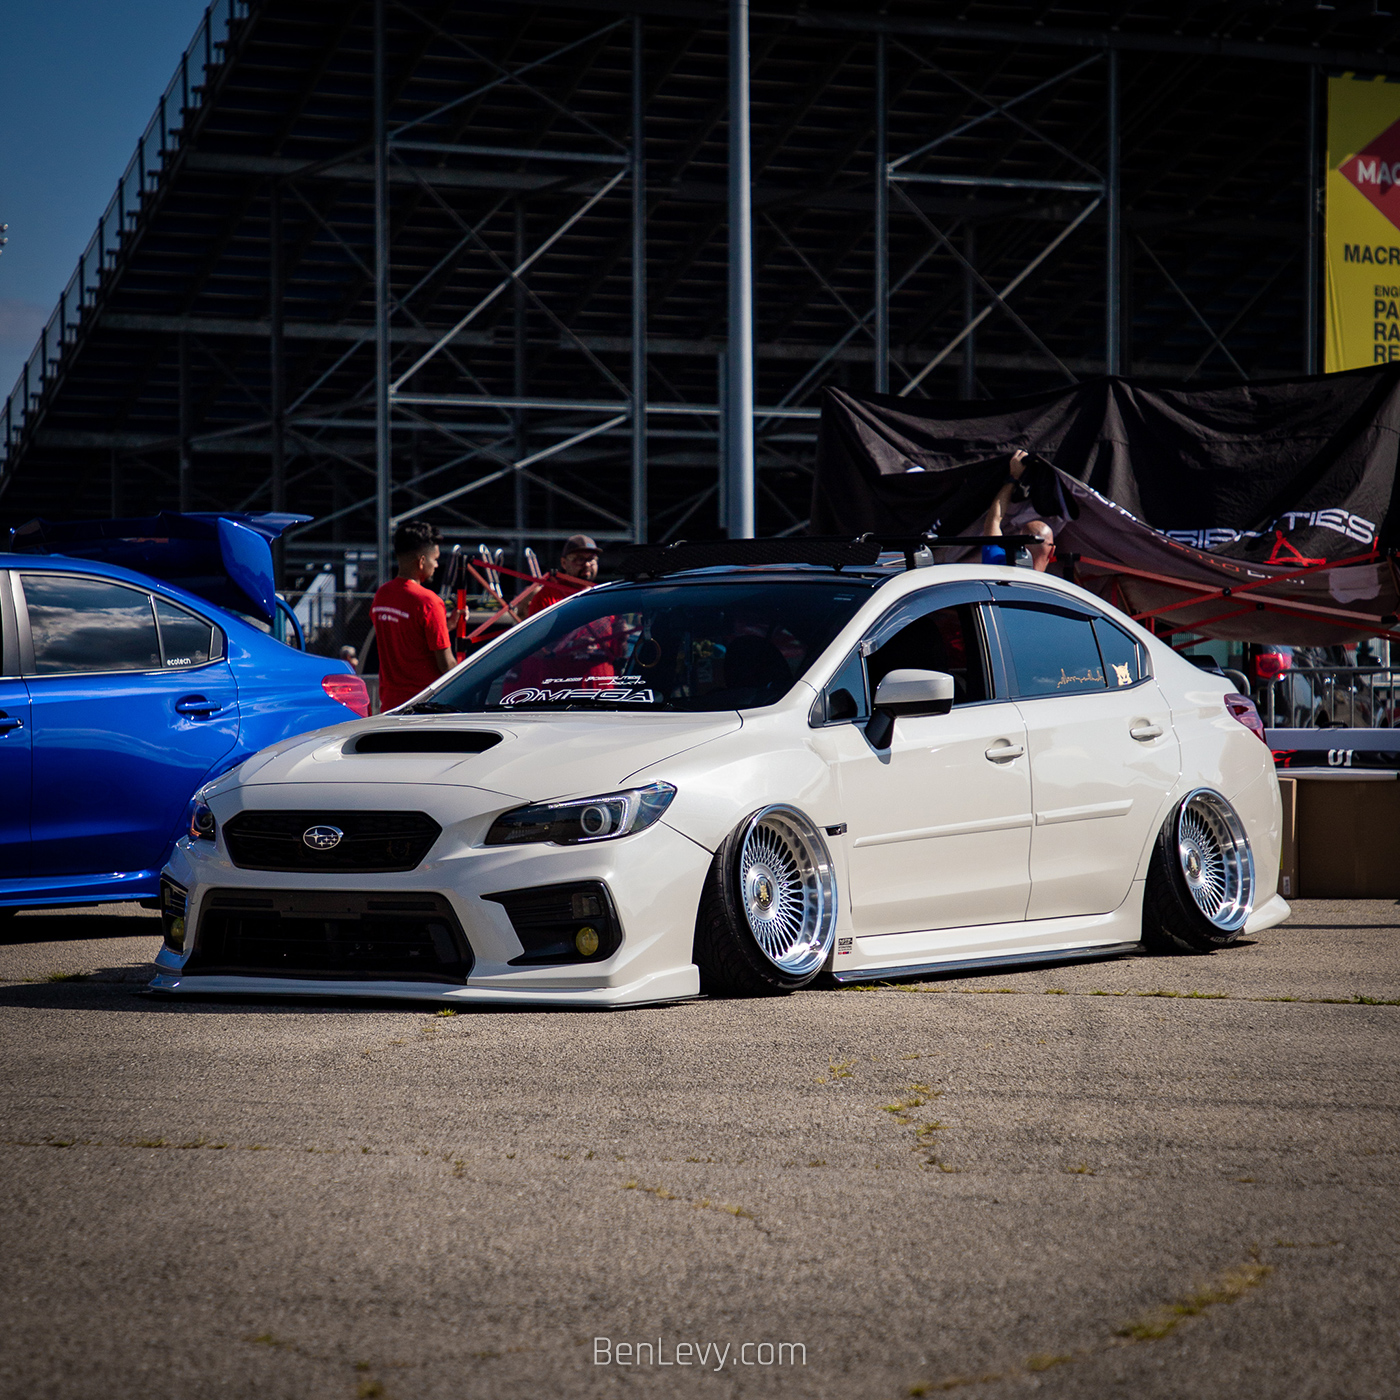 White Subaru WRX at Subiefest Midwest